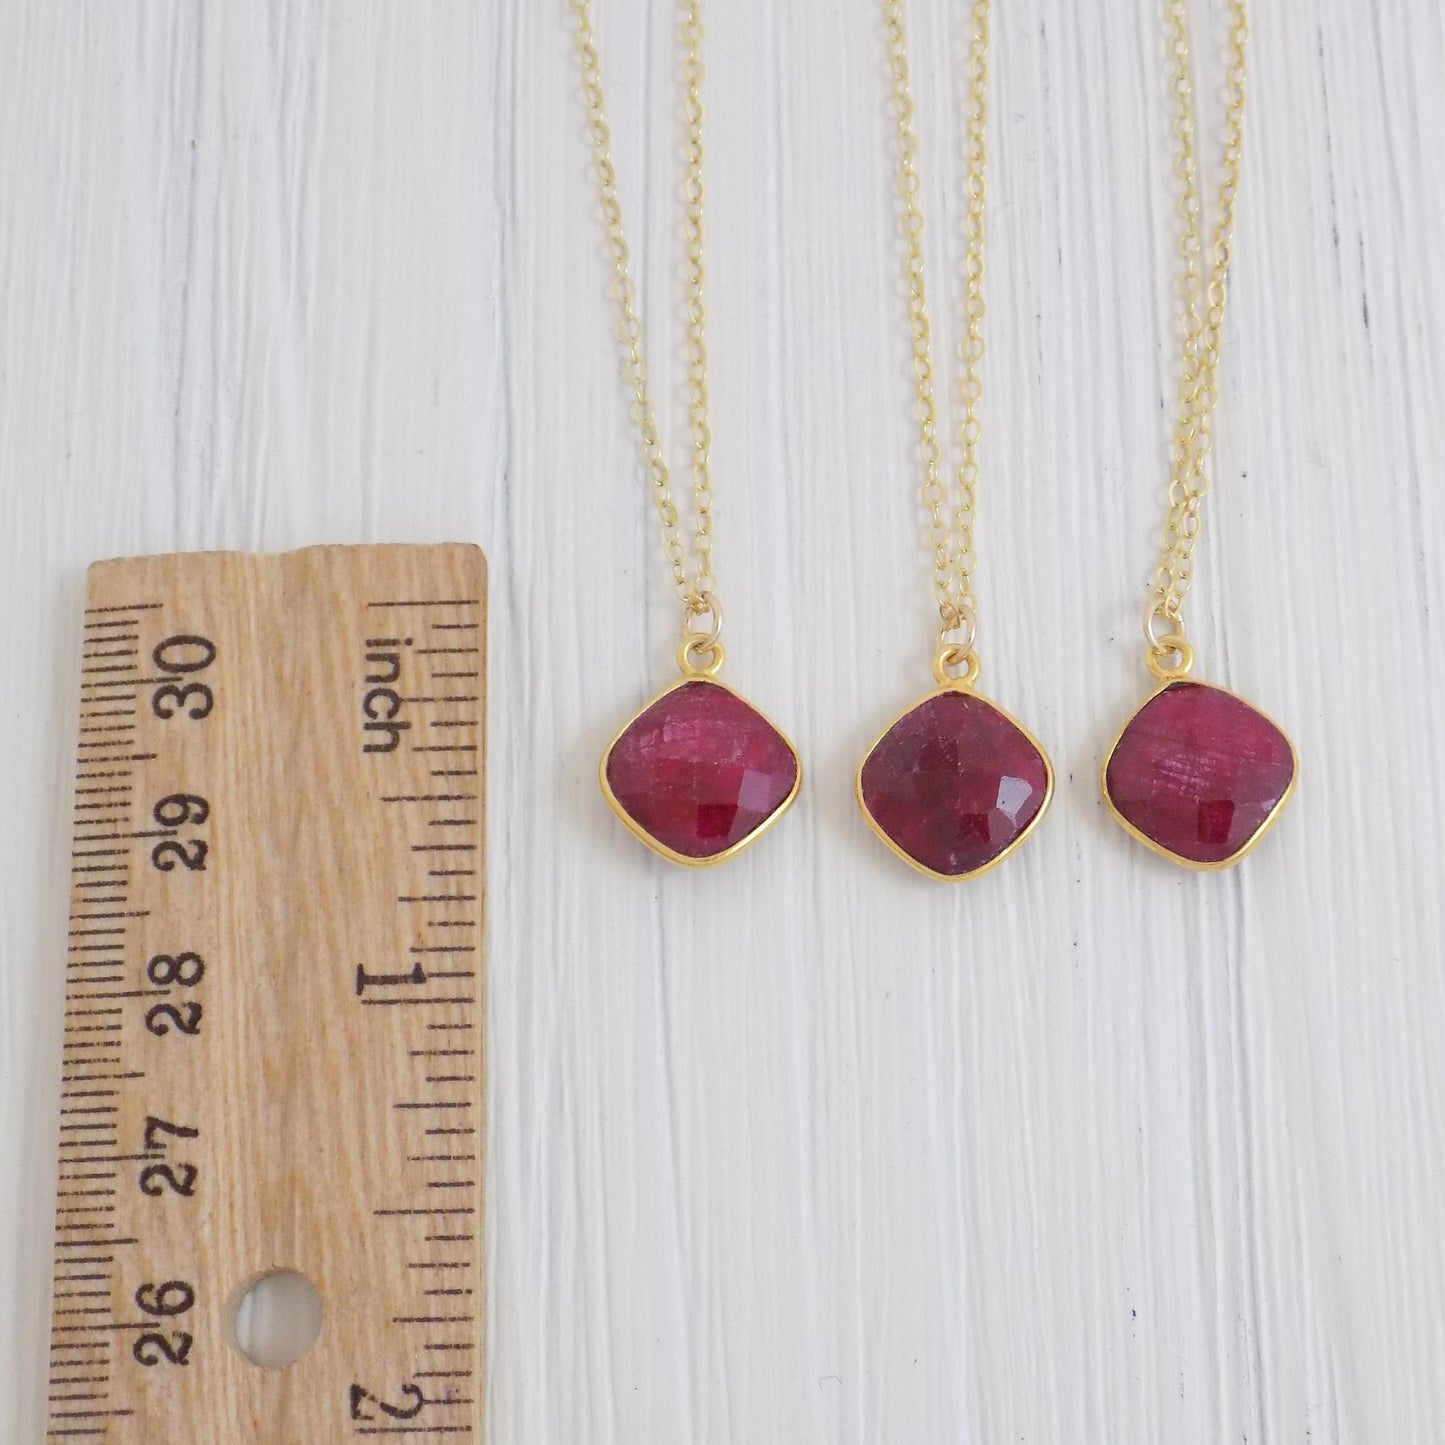 Cushion Cut Ruby Necklace Gold Personalized Initial, Gift For Mom, M2-01